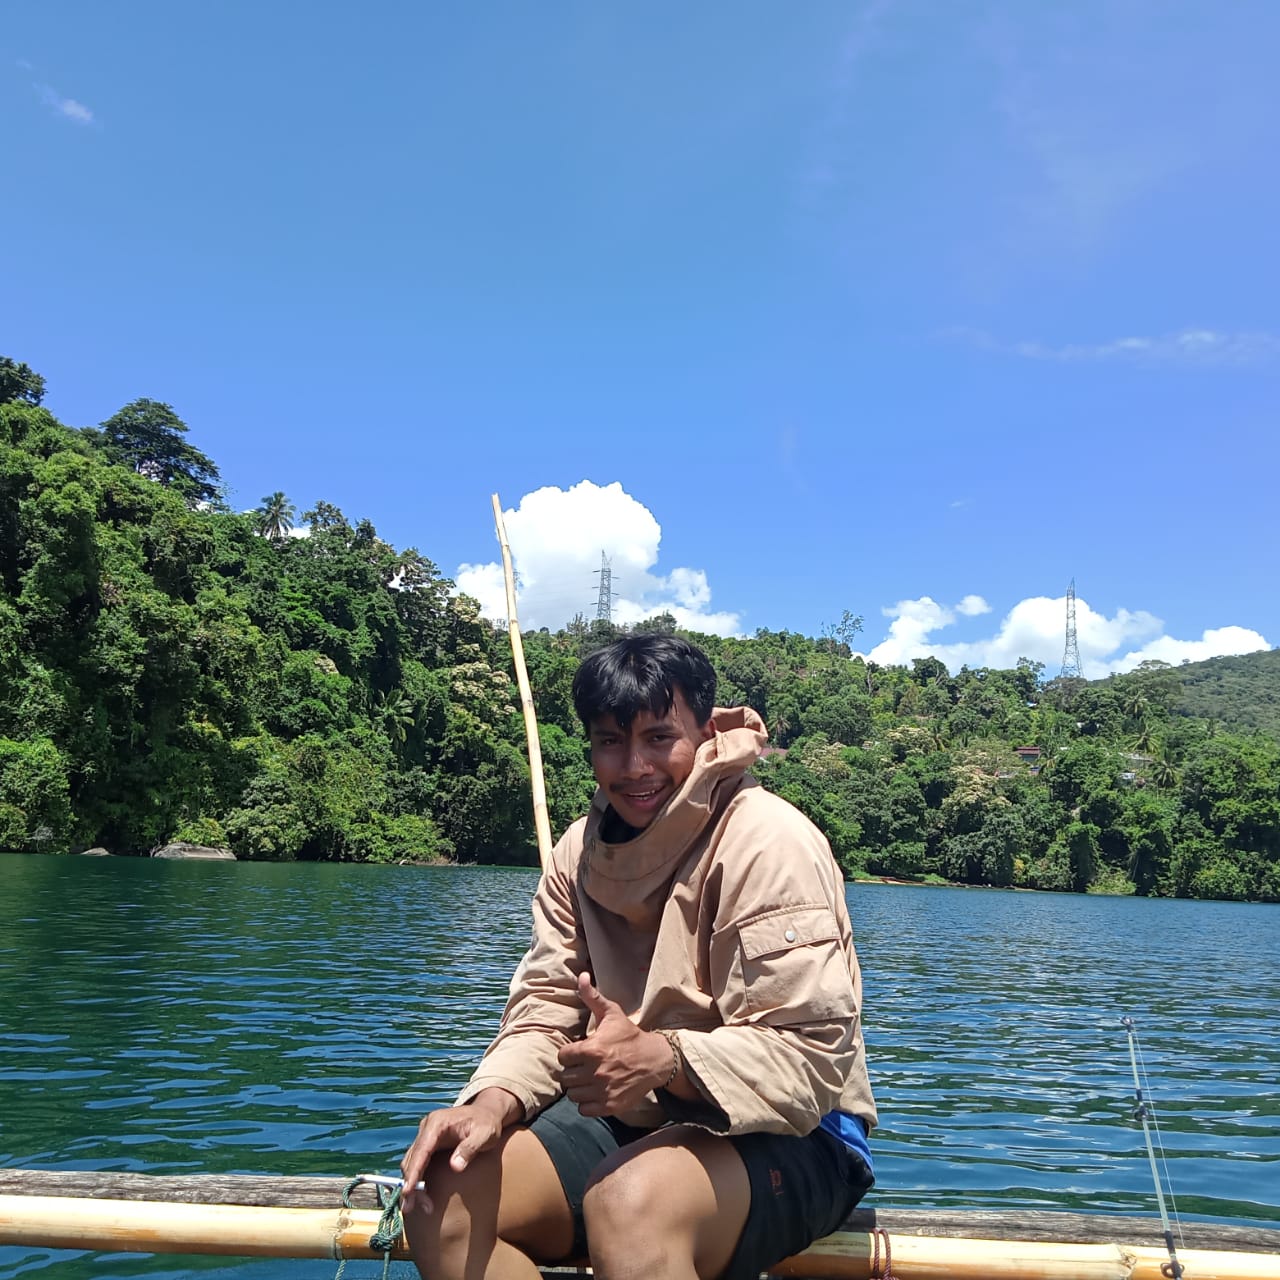 A photograph of a man who works with our partner PROGRES in Sulawesi, sitting on a boat in a lake.